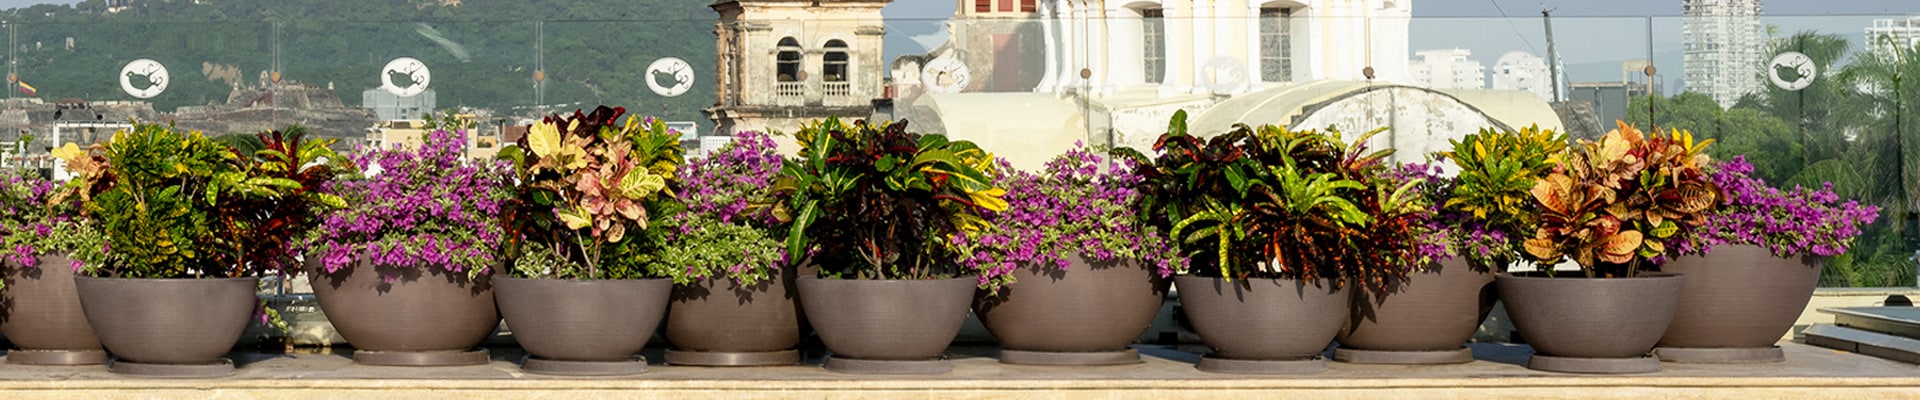 Beautiful Delano bowl planters with flowers